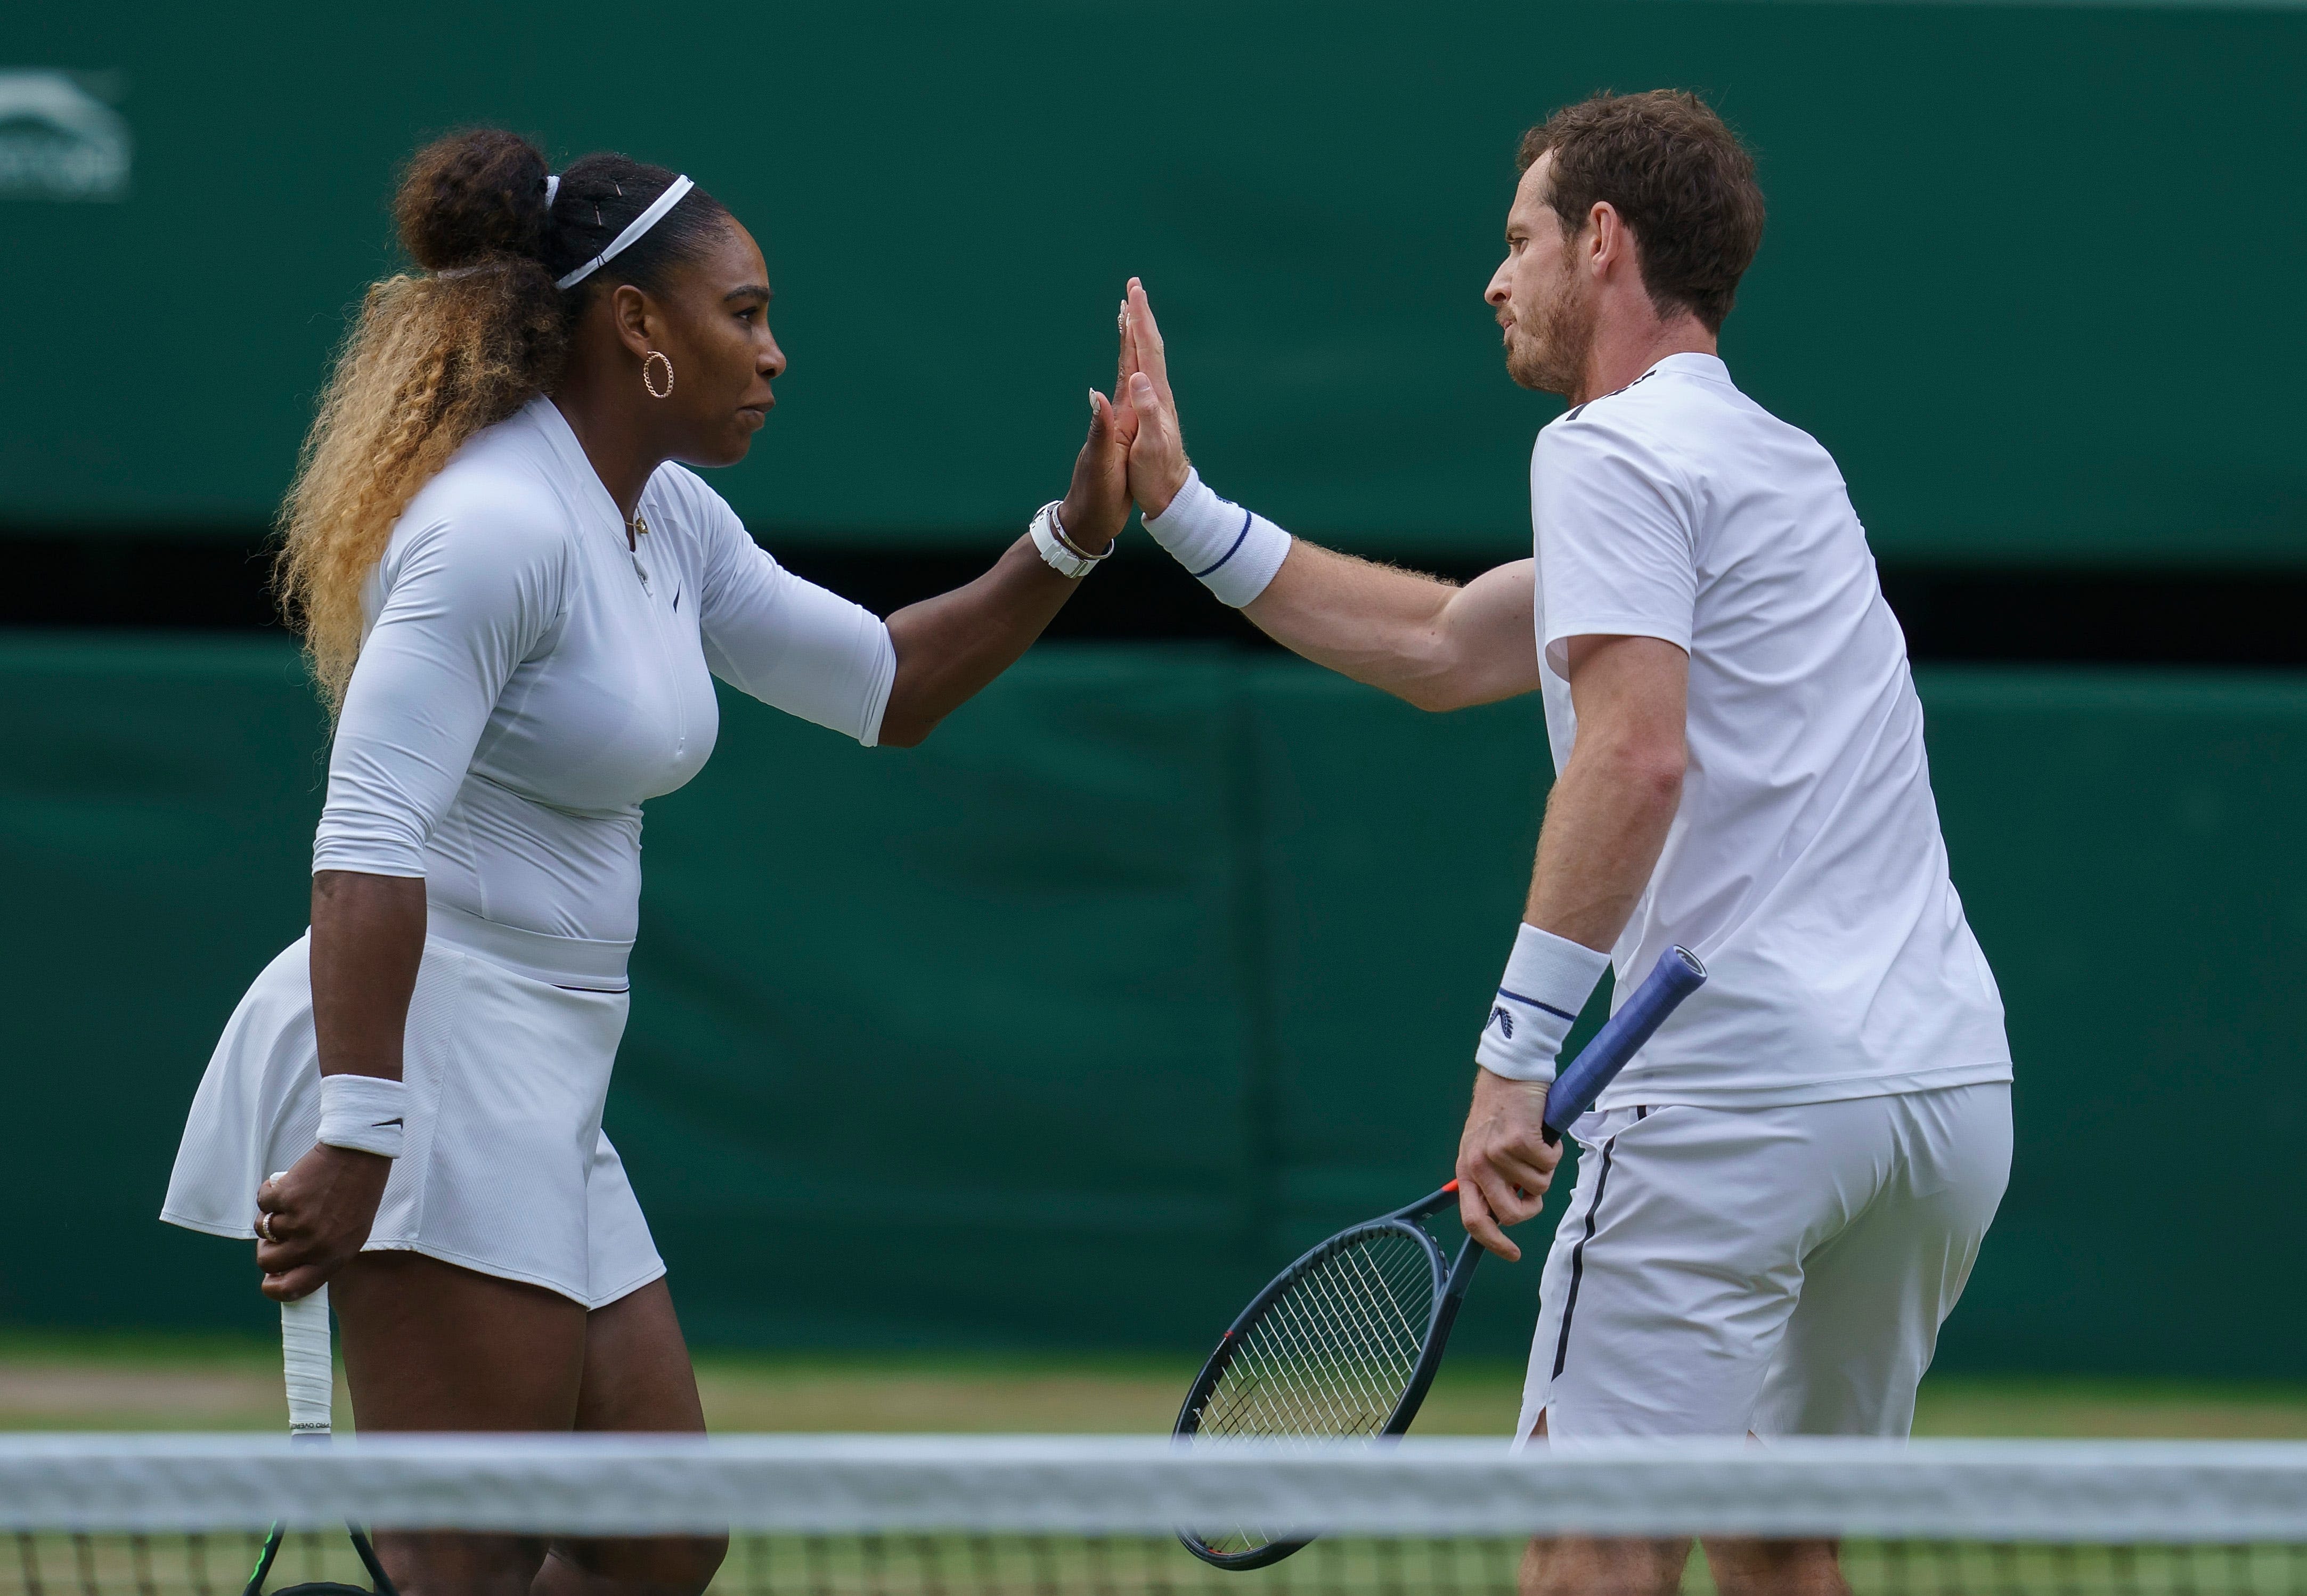 'Attitude just like mine': Serena Williams pays emotional tribute to Andy Murray